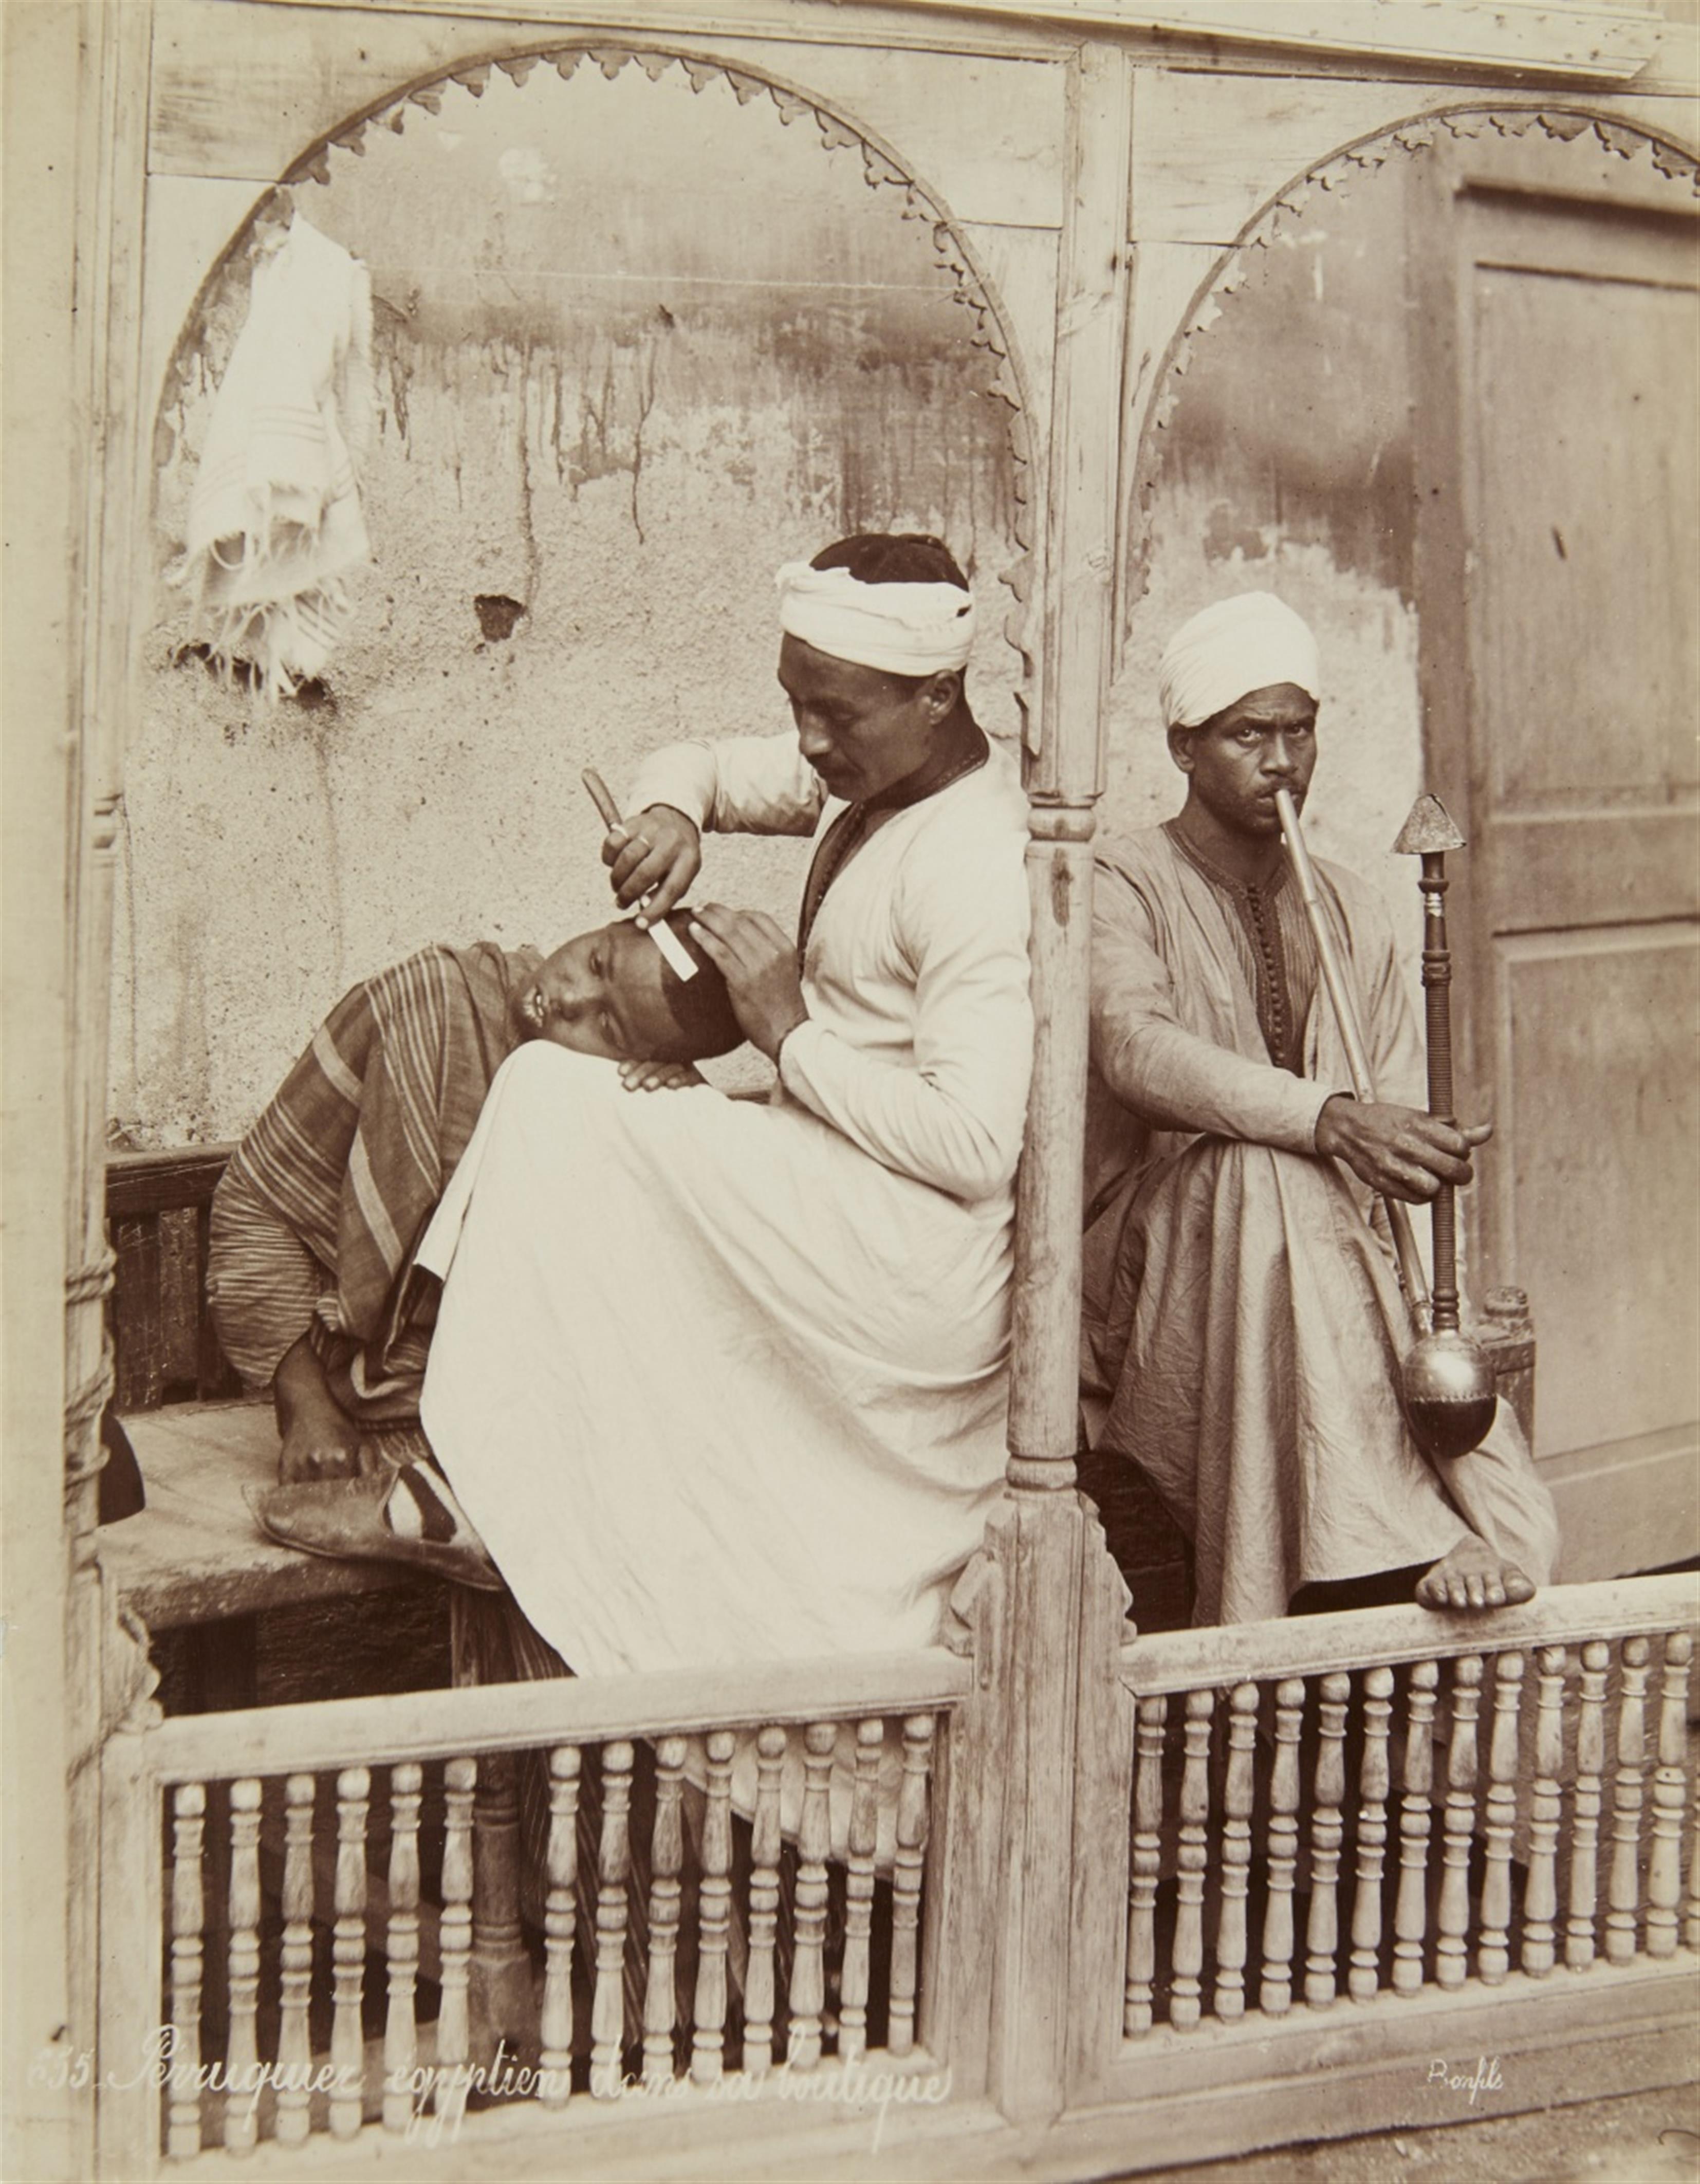 Jean-Pascal Sebah
and other photographers - Views of Egypt - image-10